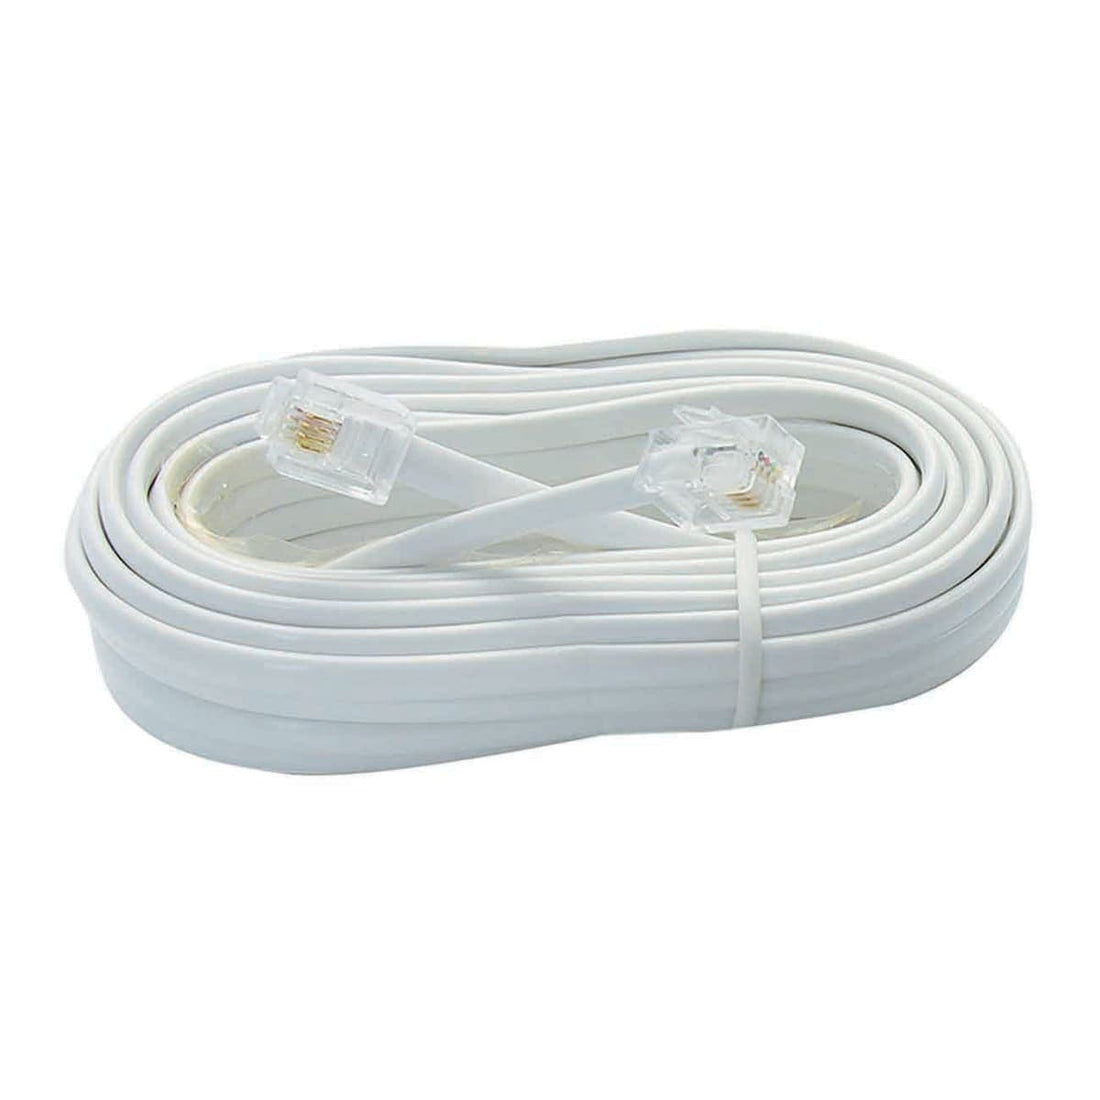 RJ11 MALE/MALE TELEPHONE EXTENSION CABLE 25MT EVOLOGY - best price from Maltashopper.com BR420230964